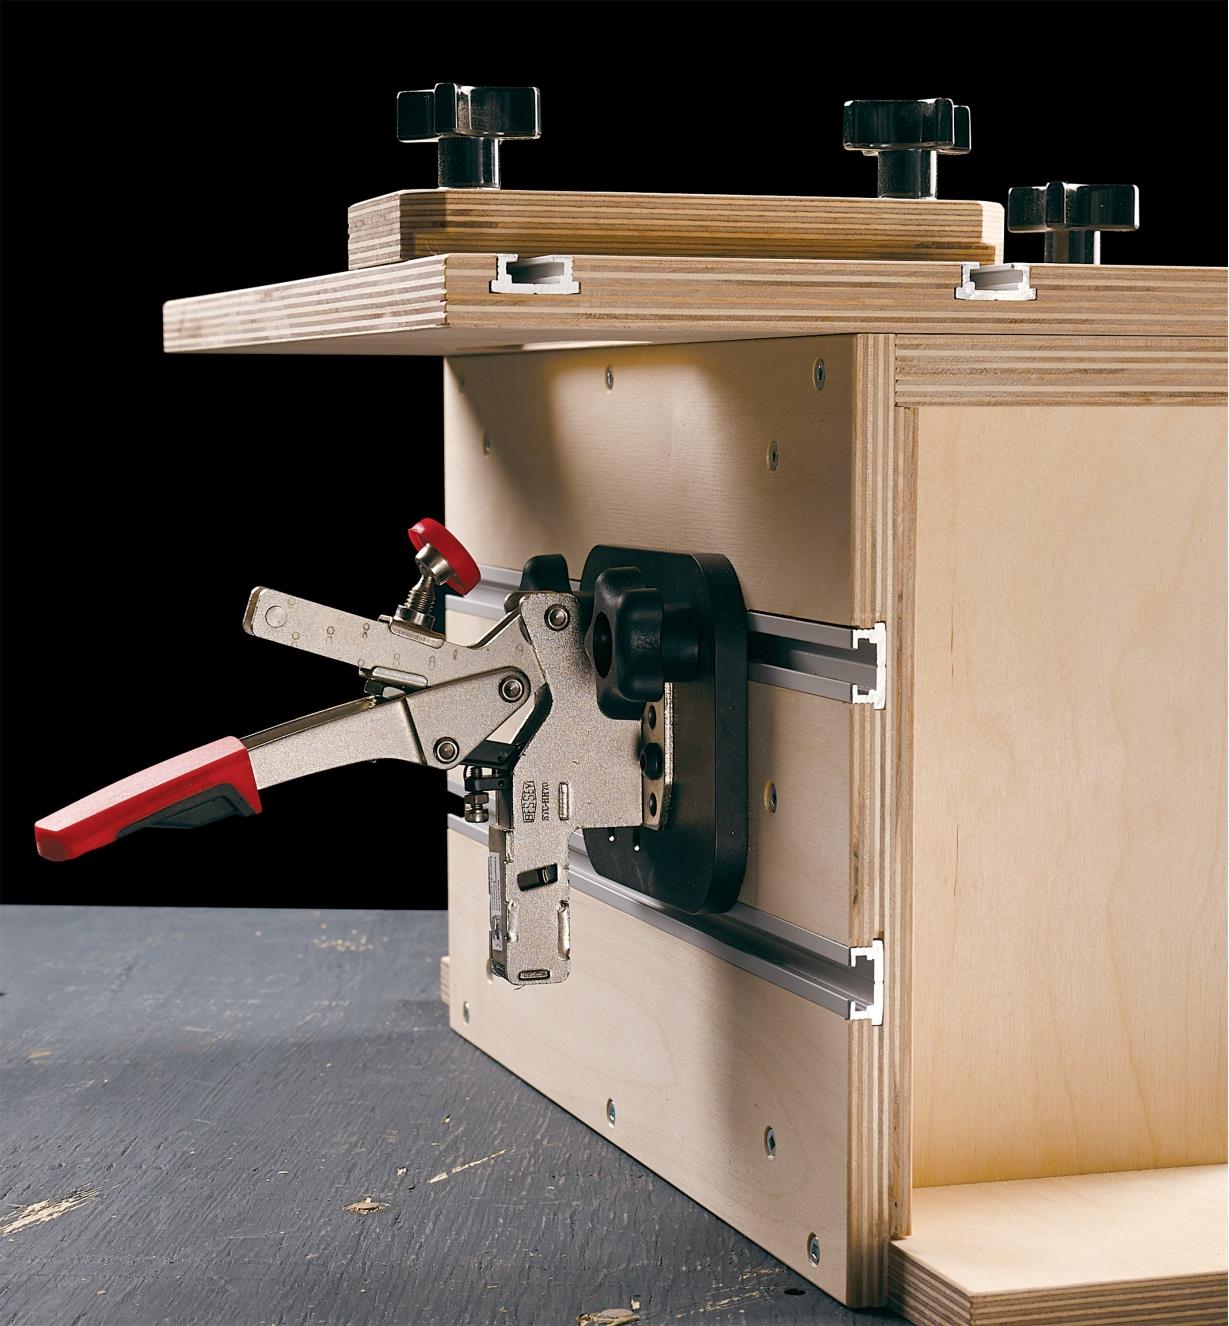 Example of a tenoning jig made with double T-slot tracks